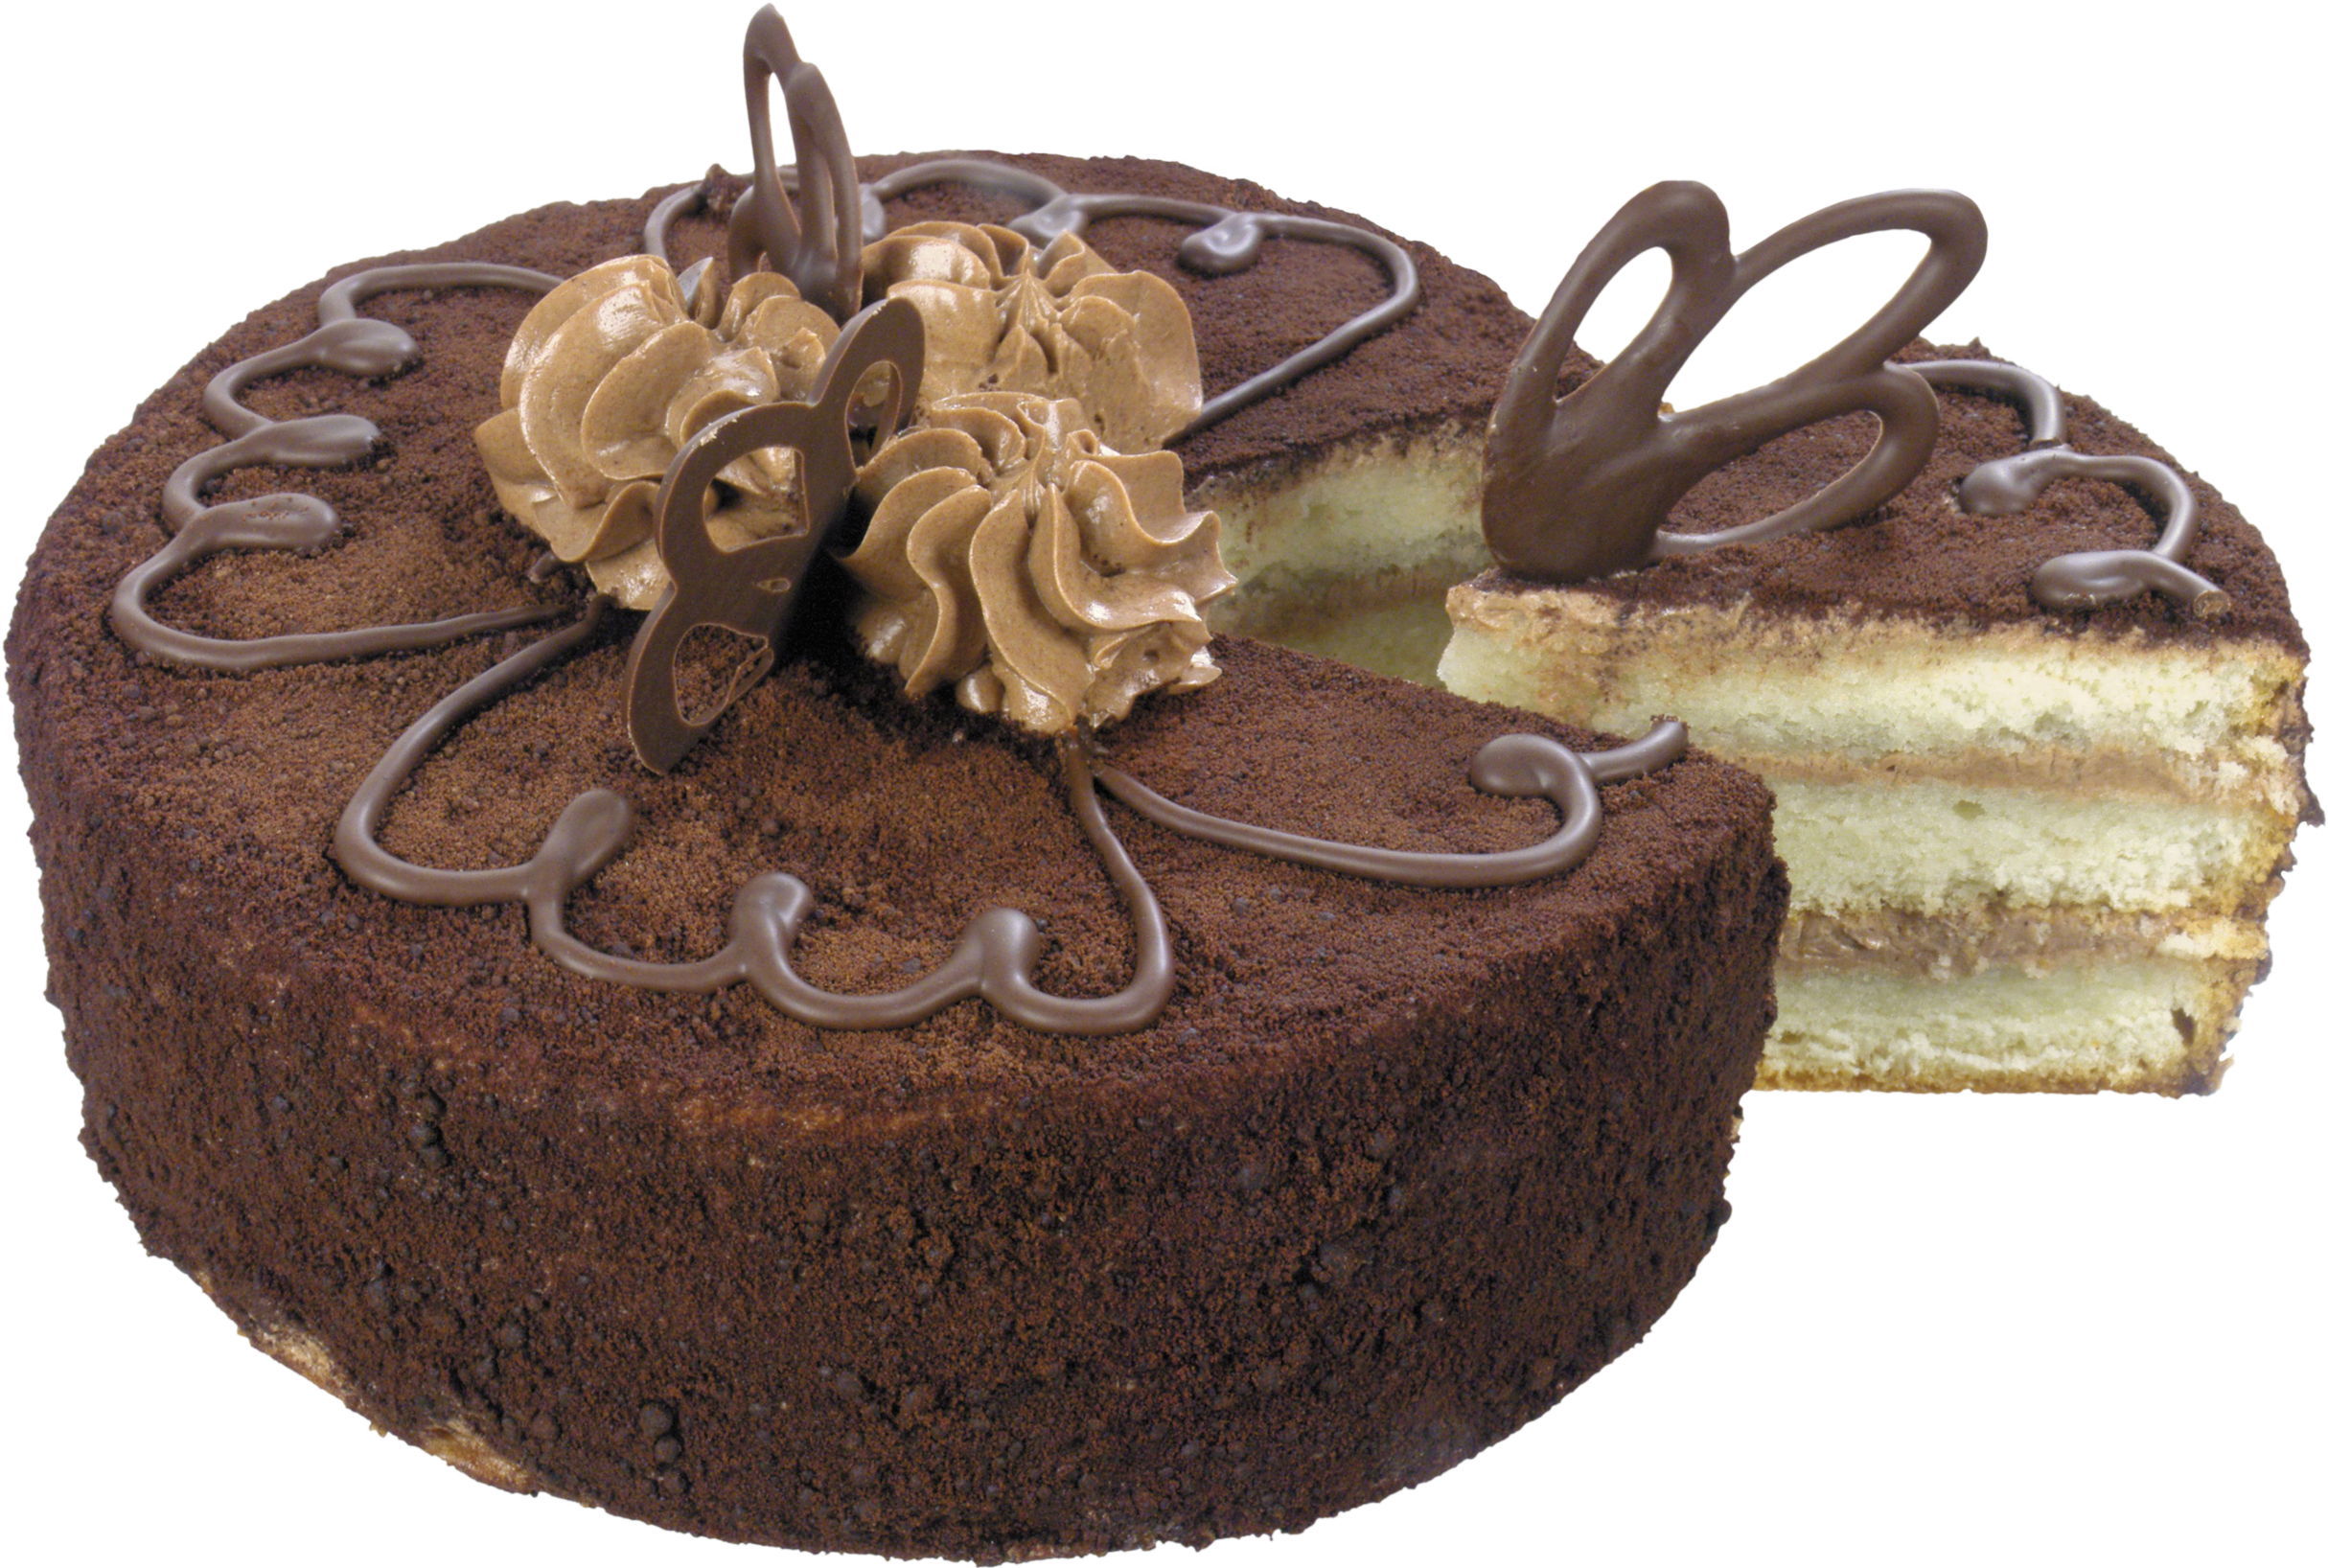 Cake Photos Chocolate PNG Image High Quality PNG Image